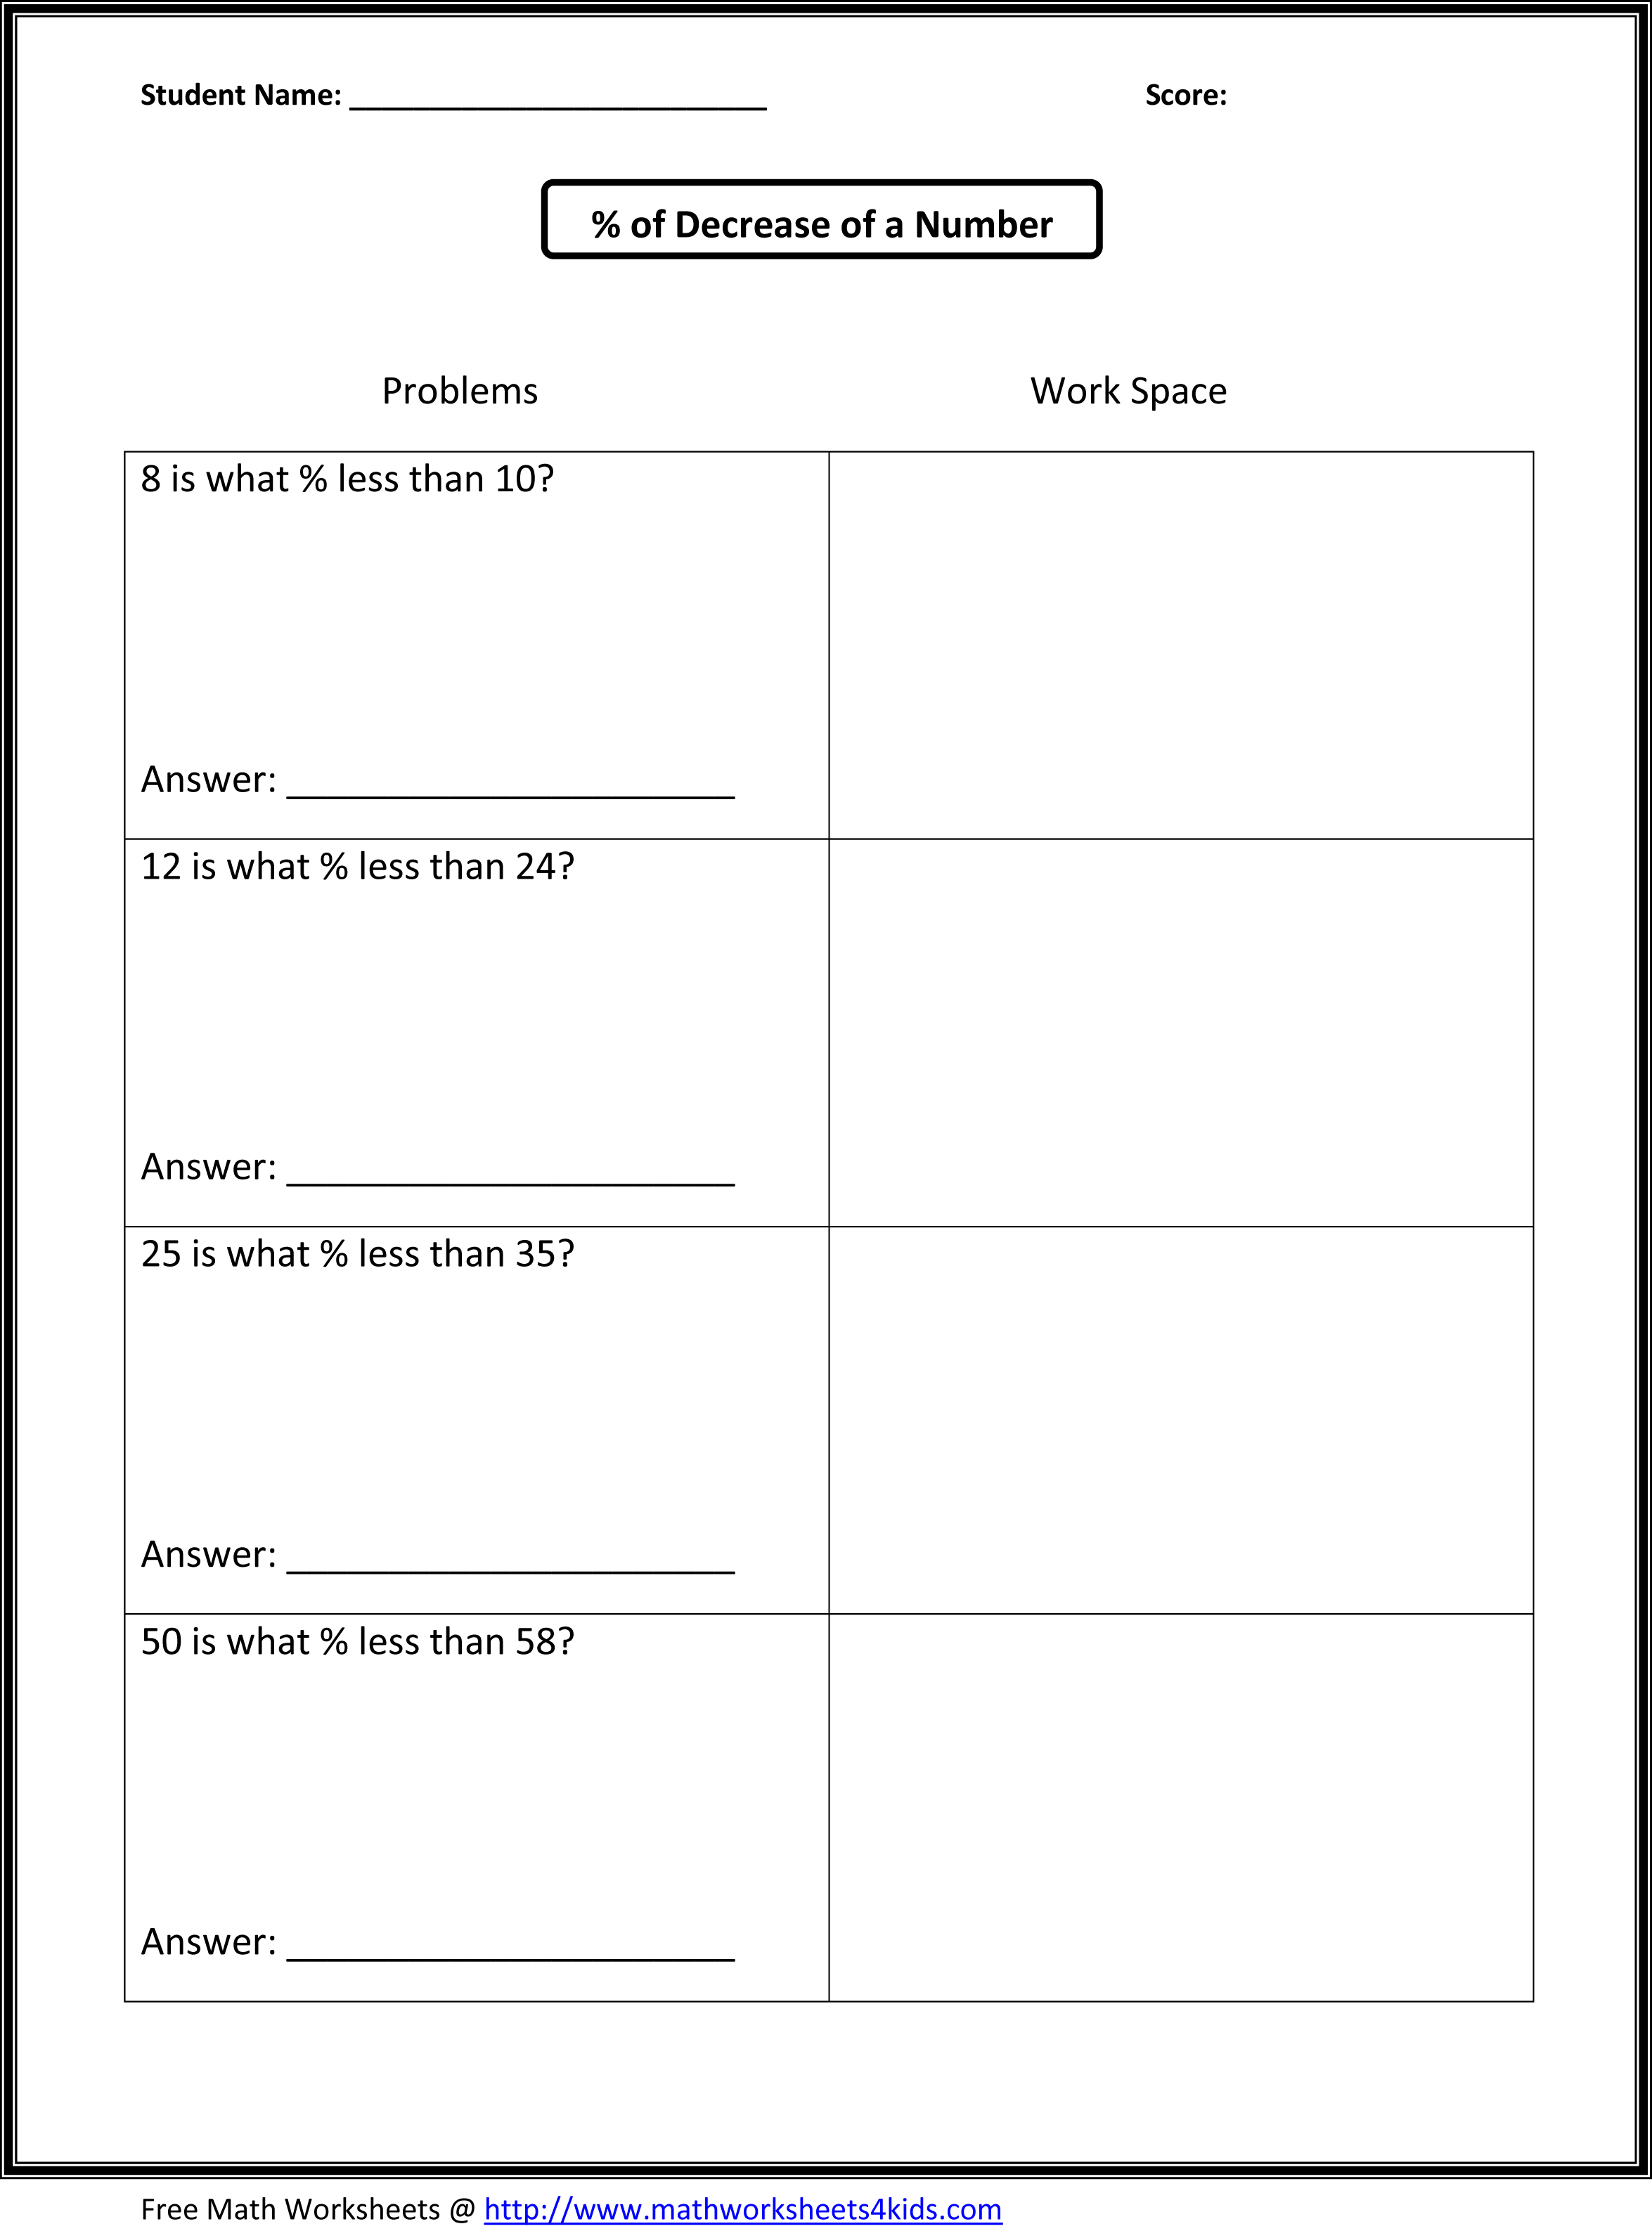 Ratios And Unit Rate - Lessons - Blendspace Inside Unit Rate Worksheet 7th Grade